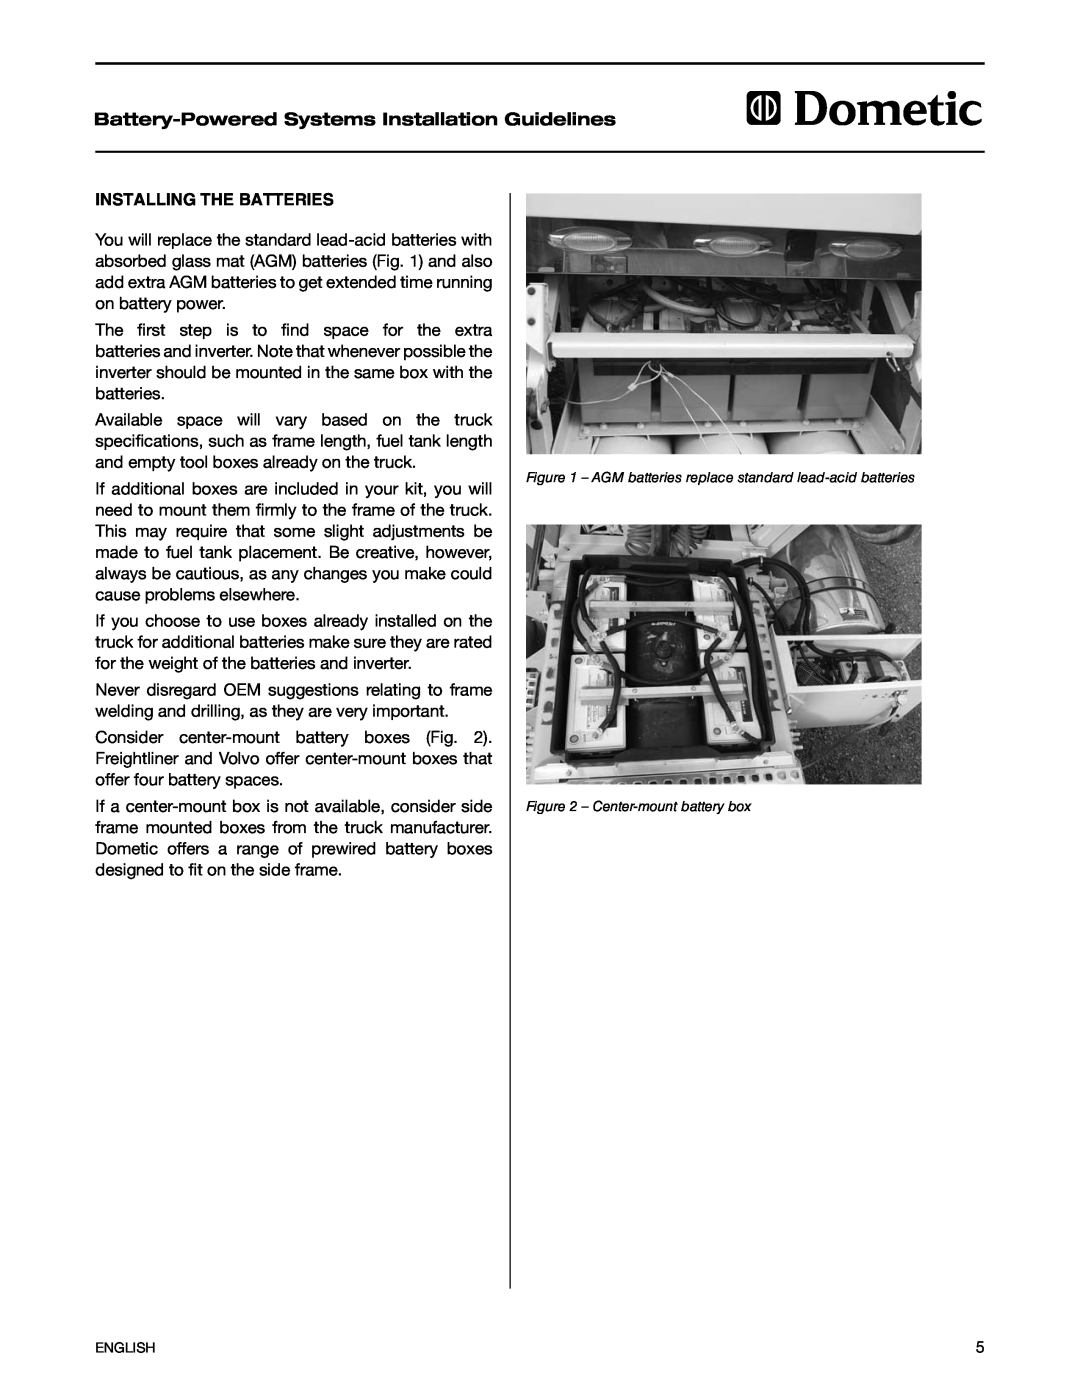 Dometic 2597 manual Installing the Batteries, Battery-PoweredSystems Installation Guidelines, Center-mountbattery box 